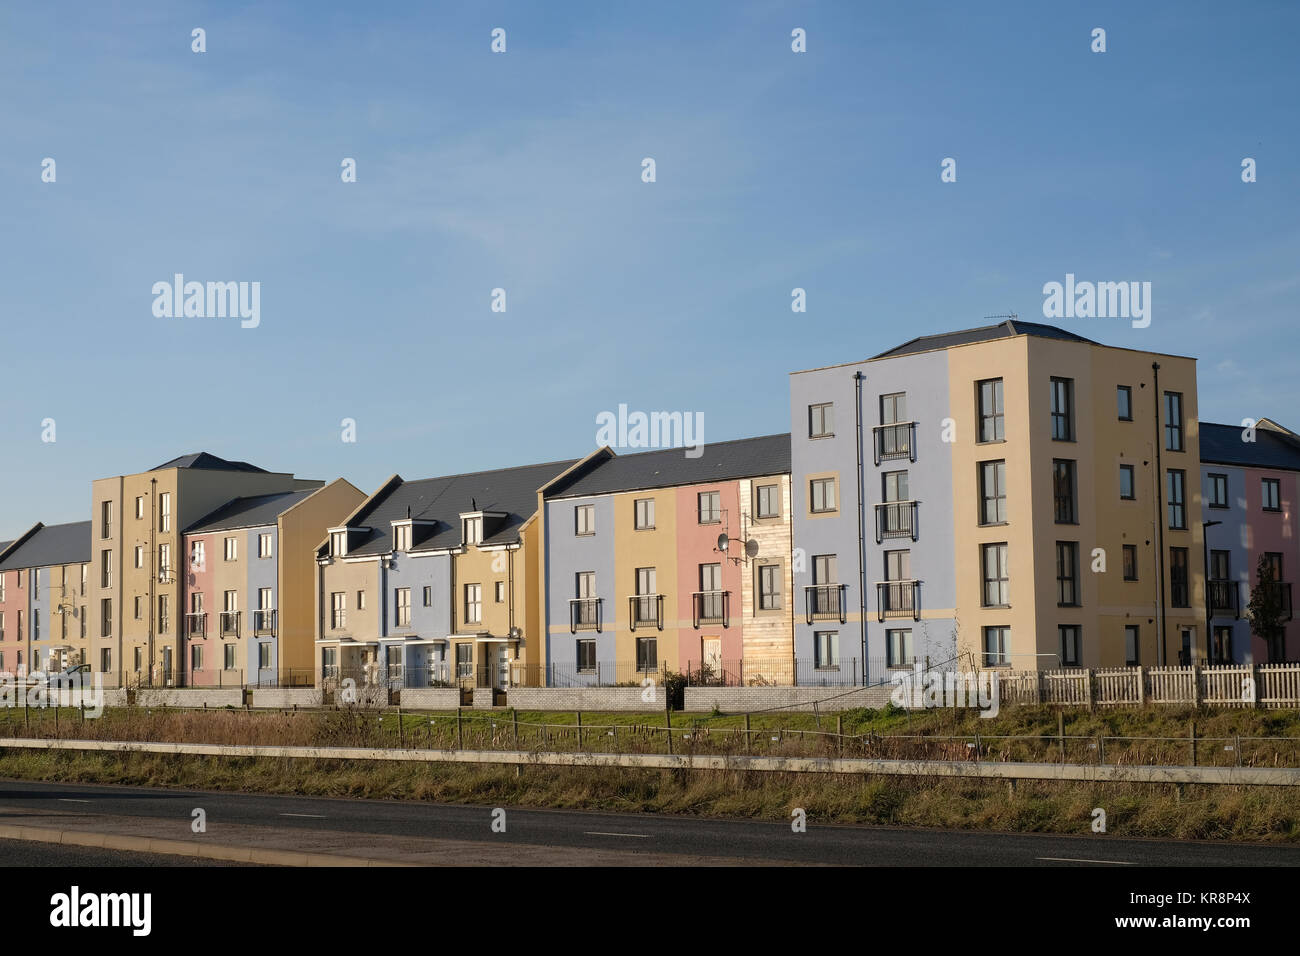 December 2017 - Line of new housing development, apartments and town houses, Filton, Bristol - Slums of tomorrow? Stock Photo